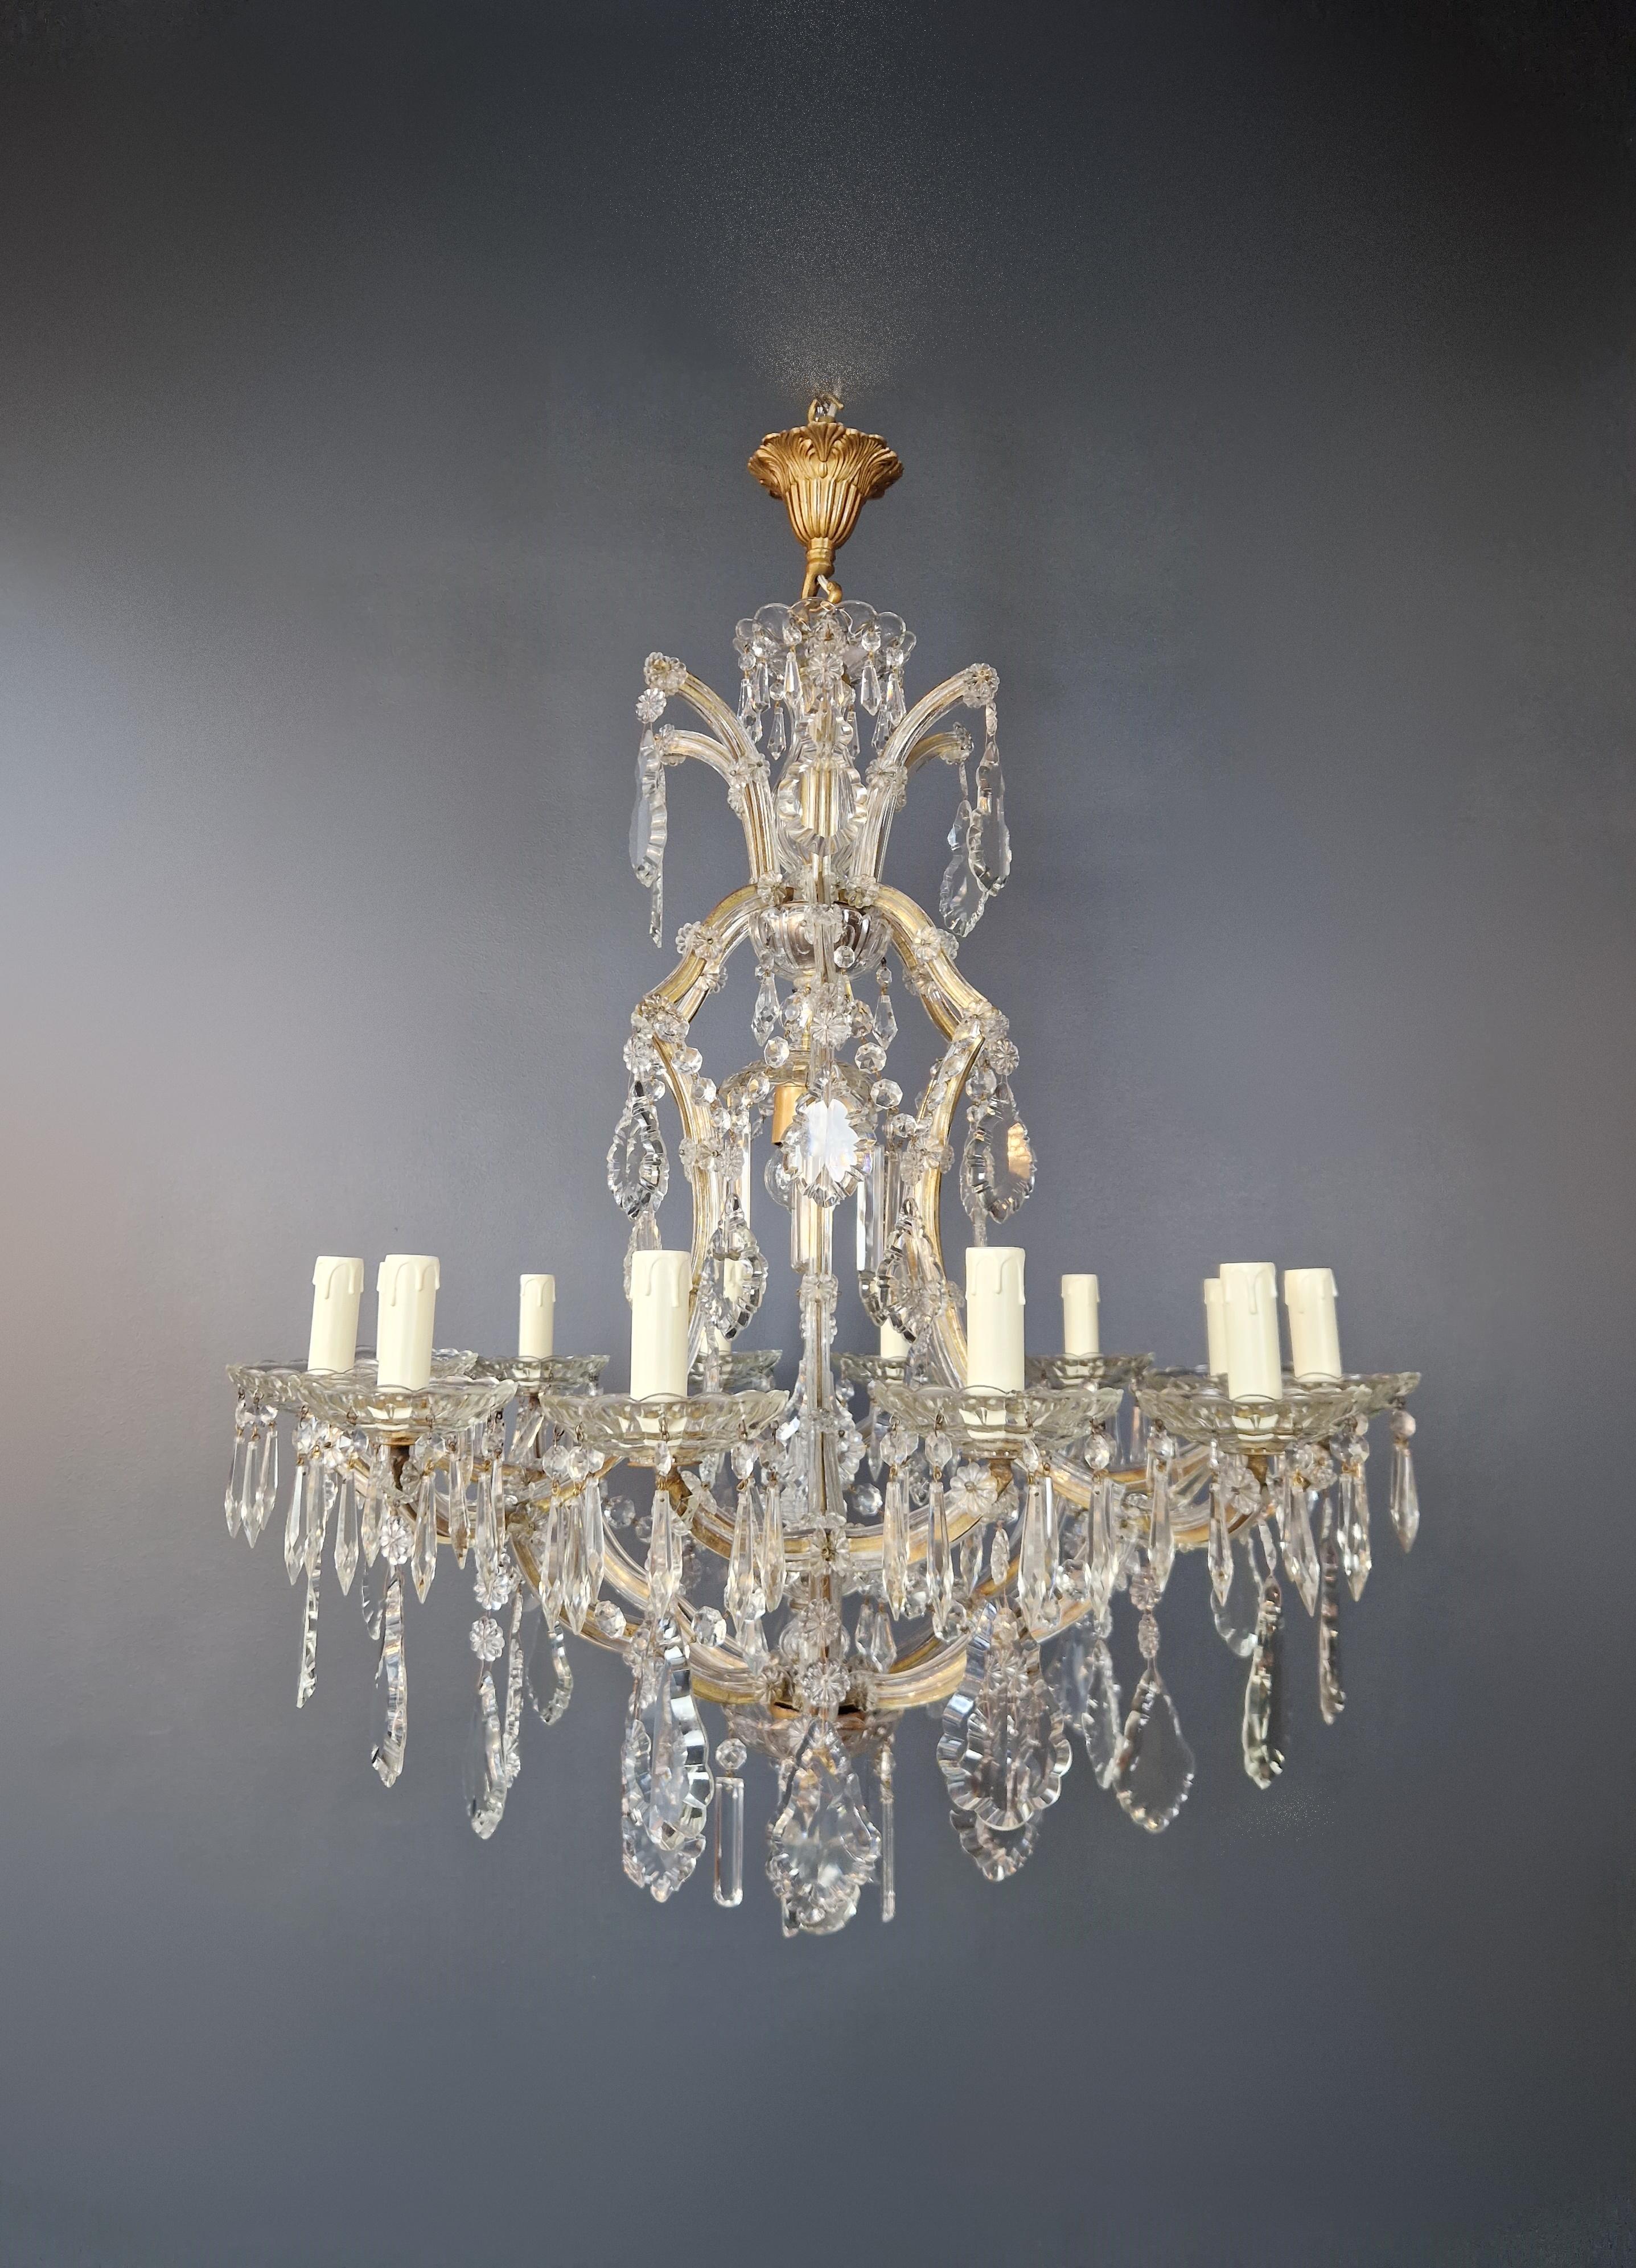 Brass Maria Theresa Crystal Chandelier Antique Classic Clear Glass For Sale